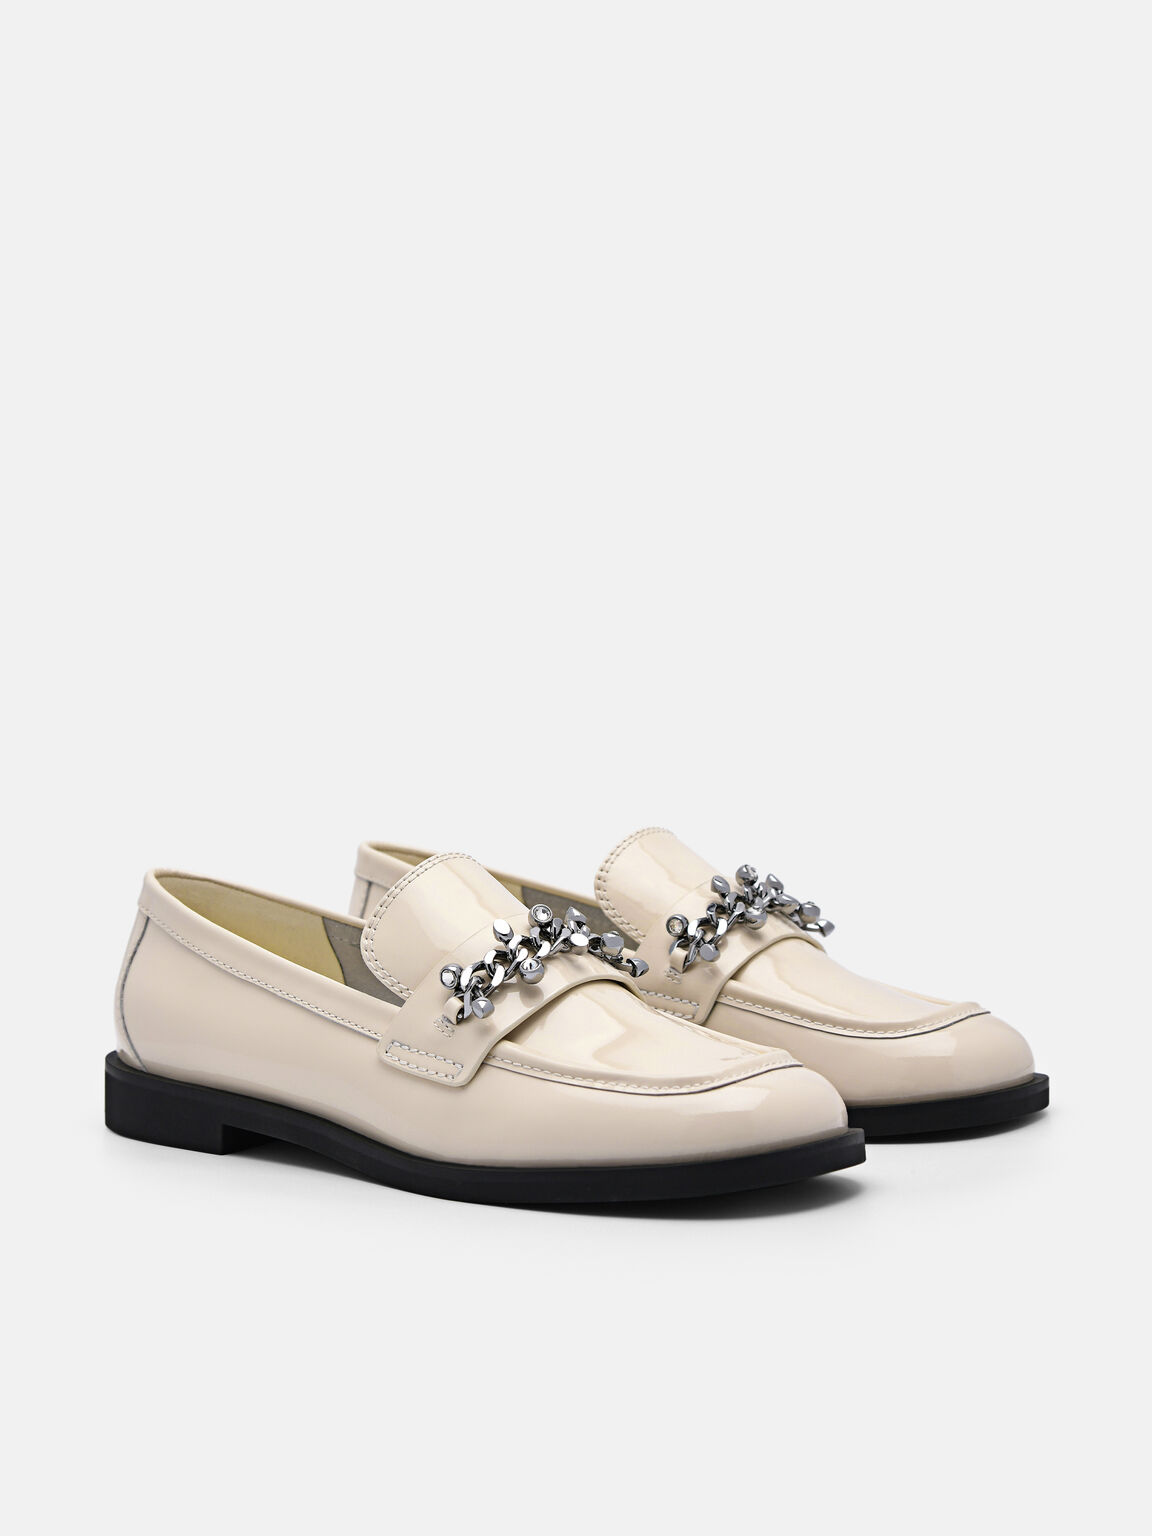 Cami Leather Loafers, Beige, hi-res